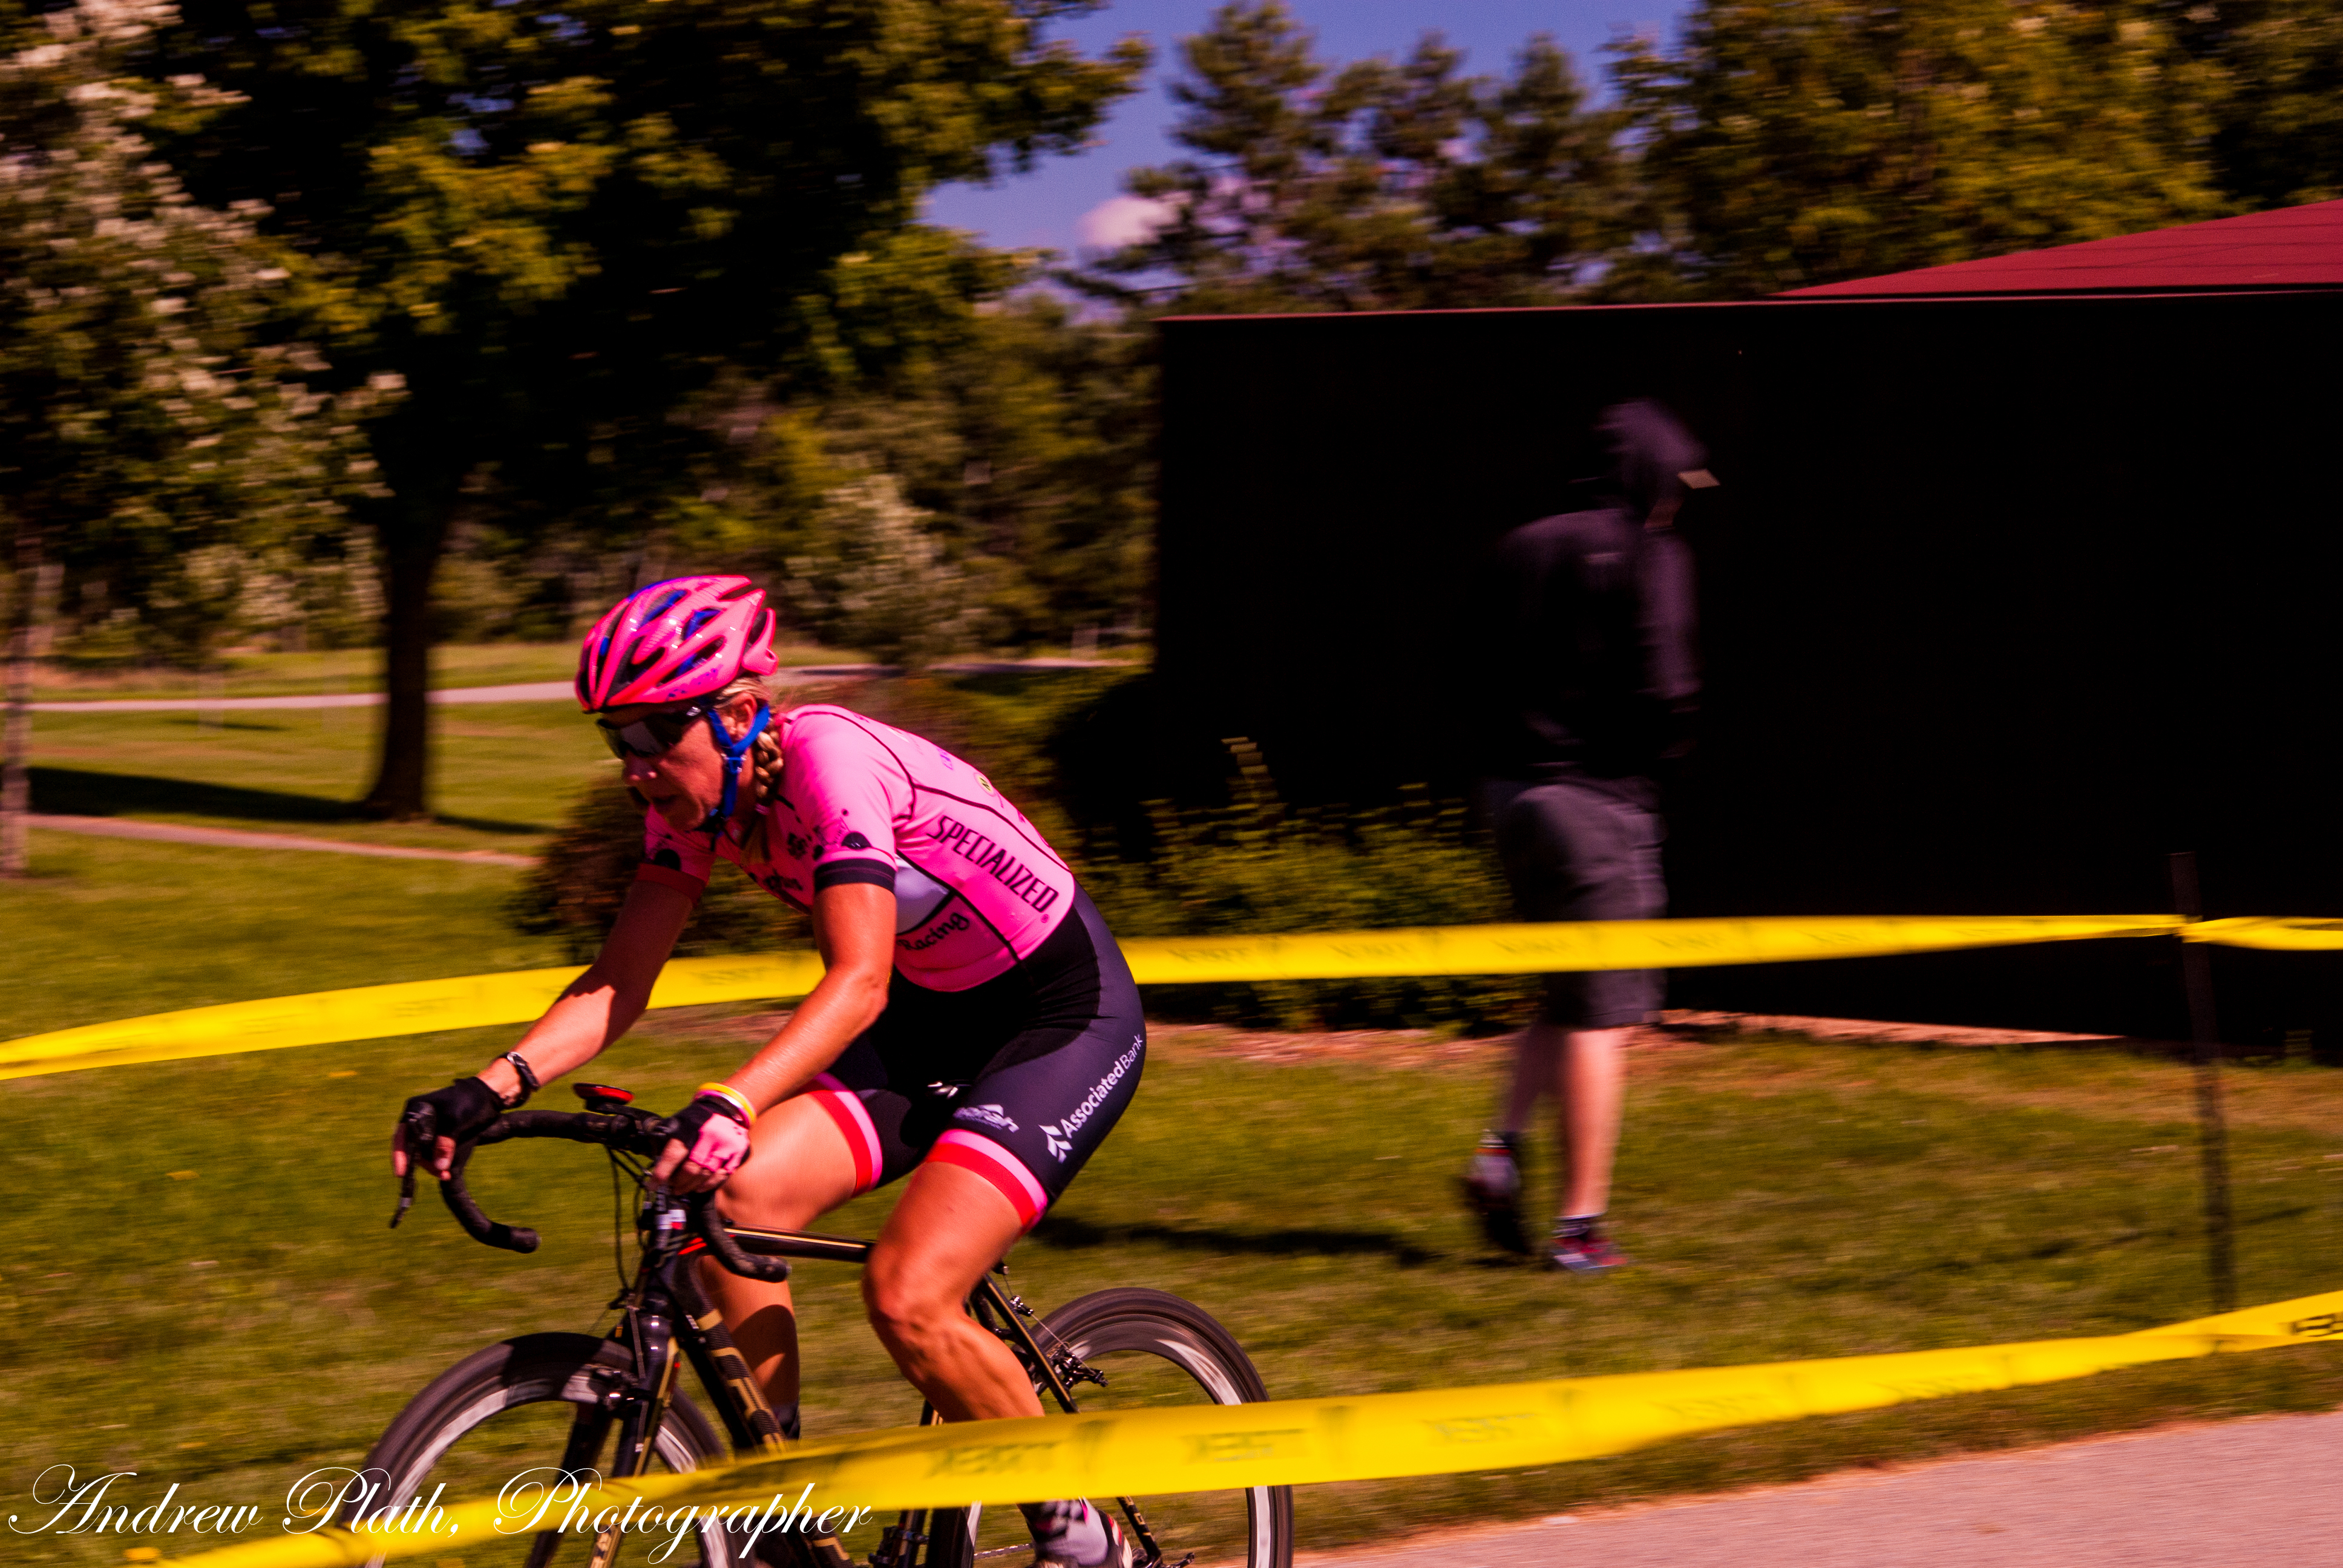 Julie Gloede Phelps. along with Kris Tiles and others compete in a women's heat at Cross of the North.